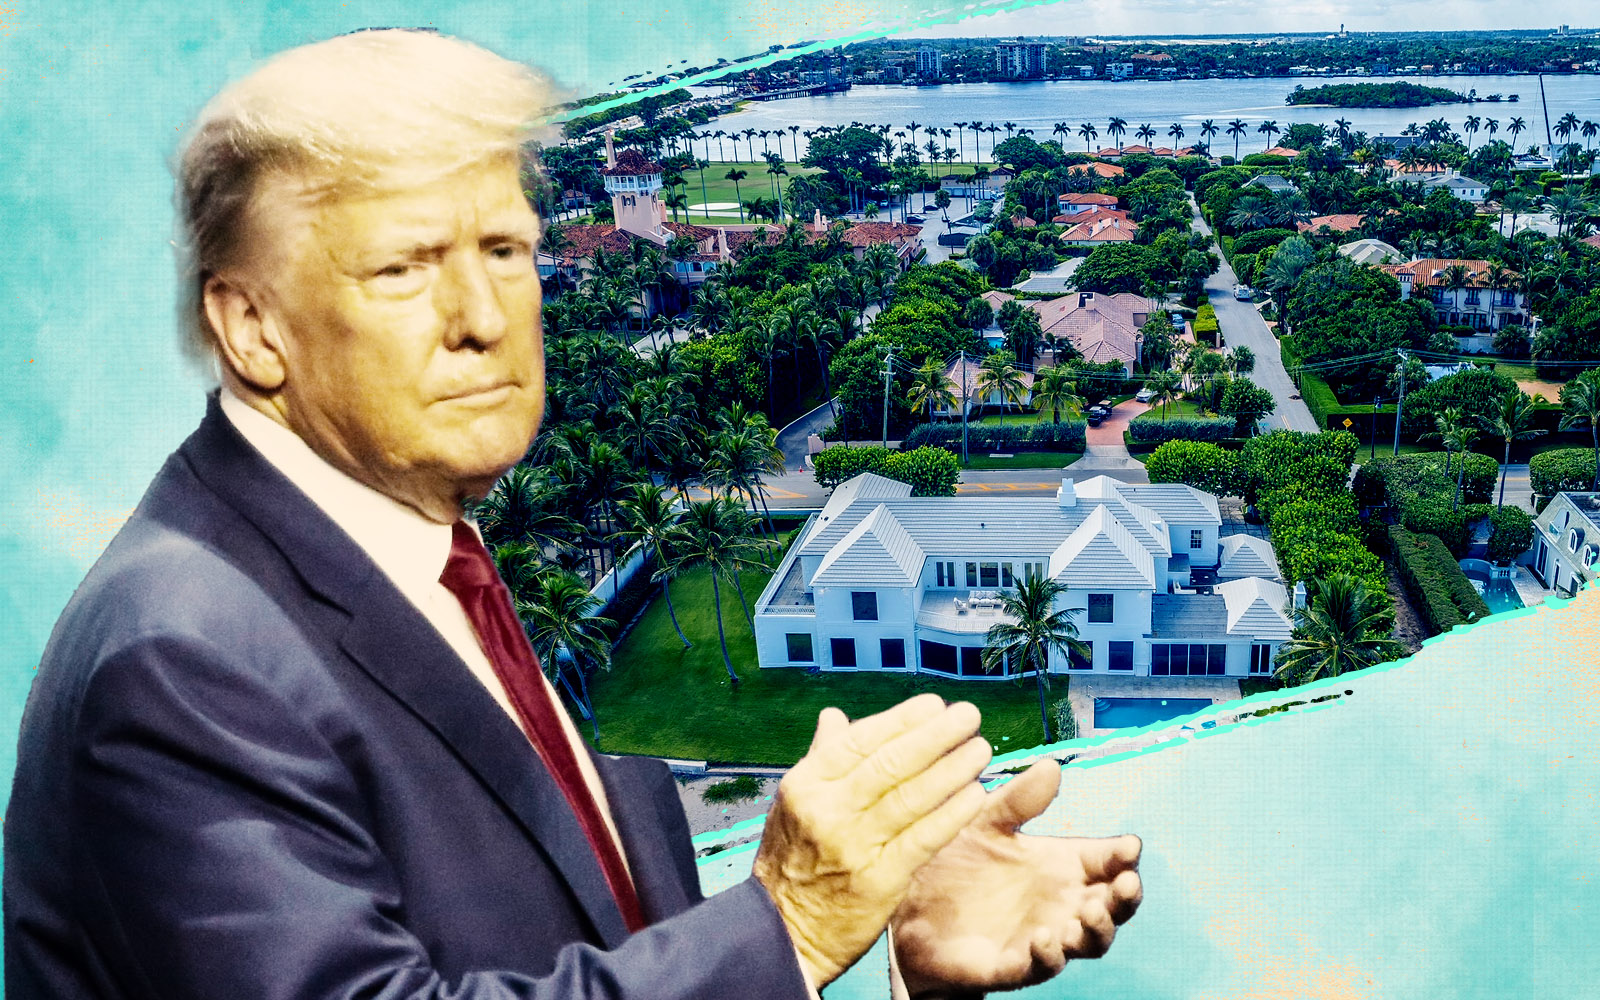 Donald Trump and photo of property at 1125 South Ocean Boulevard in Palm Beach (Roberto Dangond, Getty)